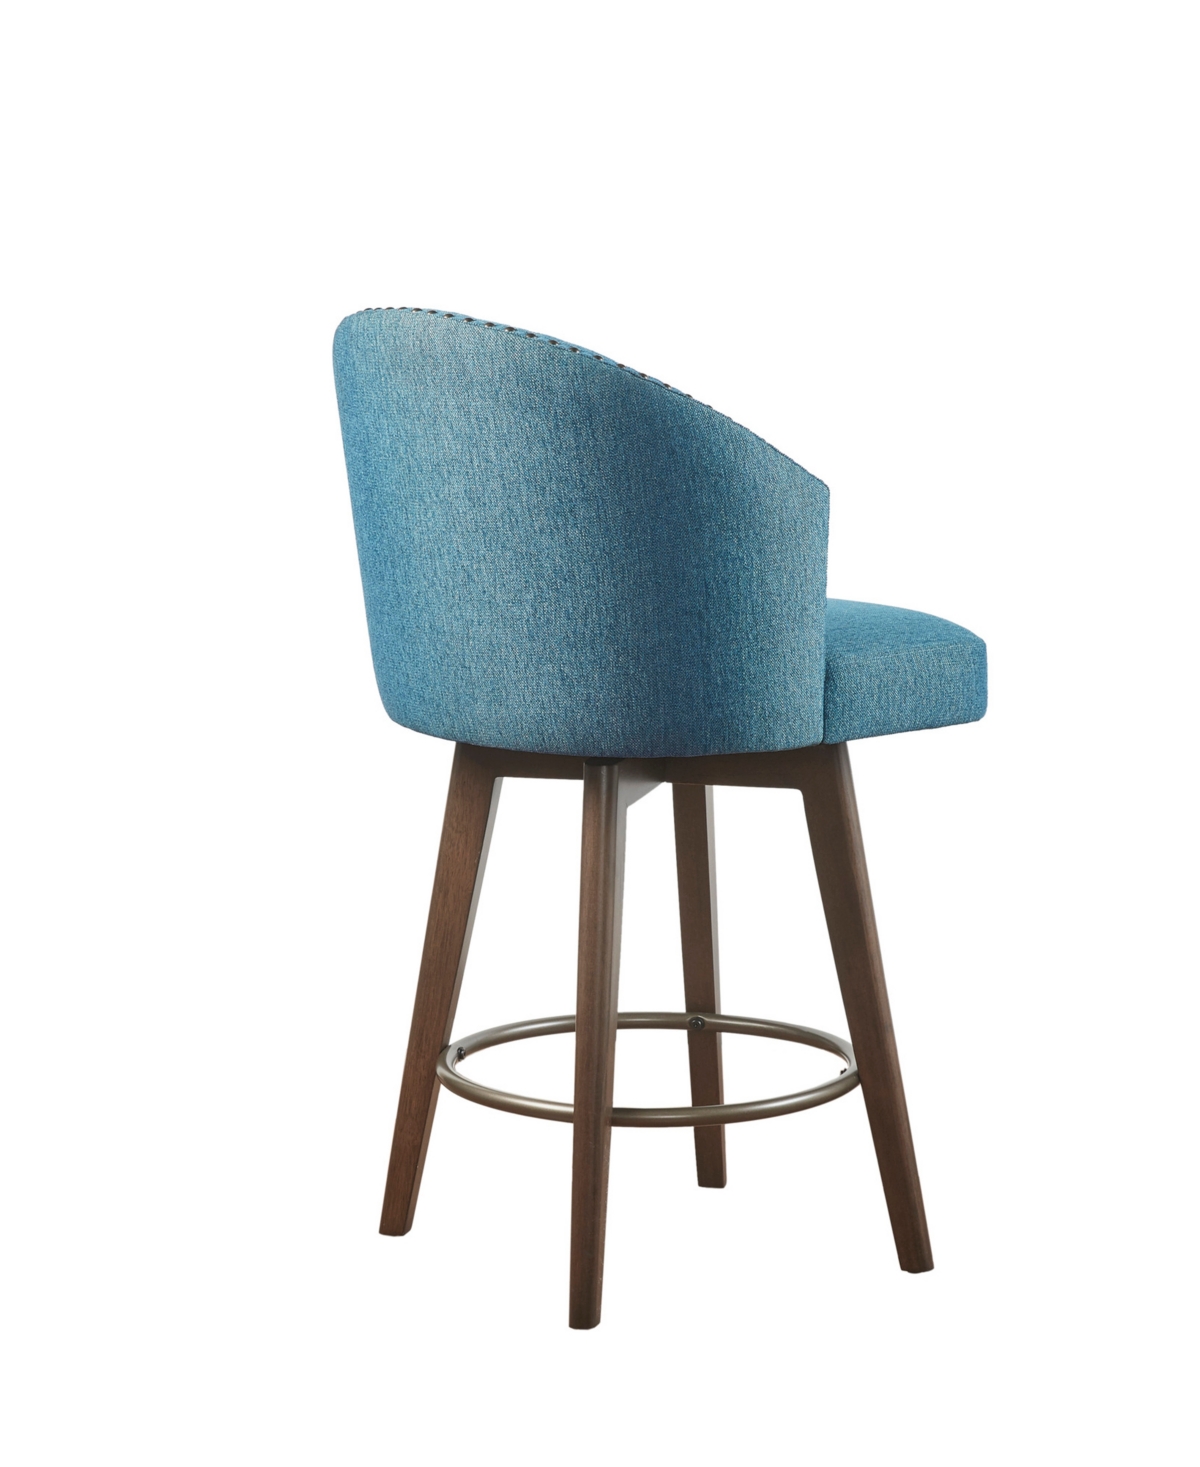 Shop Madison Park Onyx 20.5" Wide Fabric Upholstered 360 Degree Swivel Counter Stool In Blue